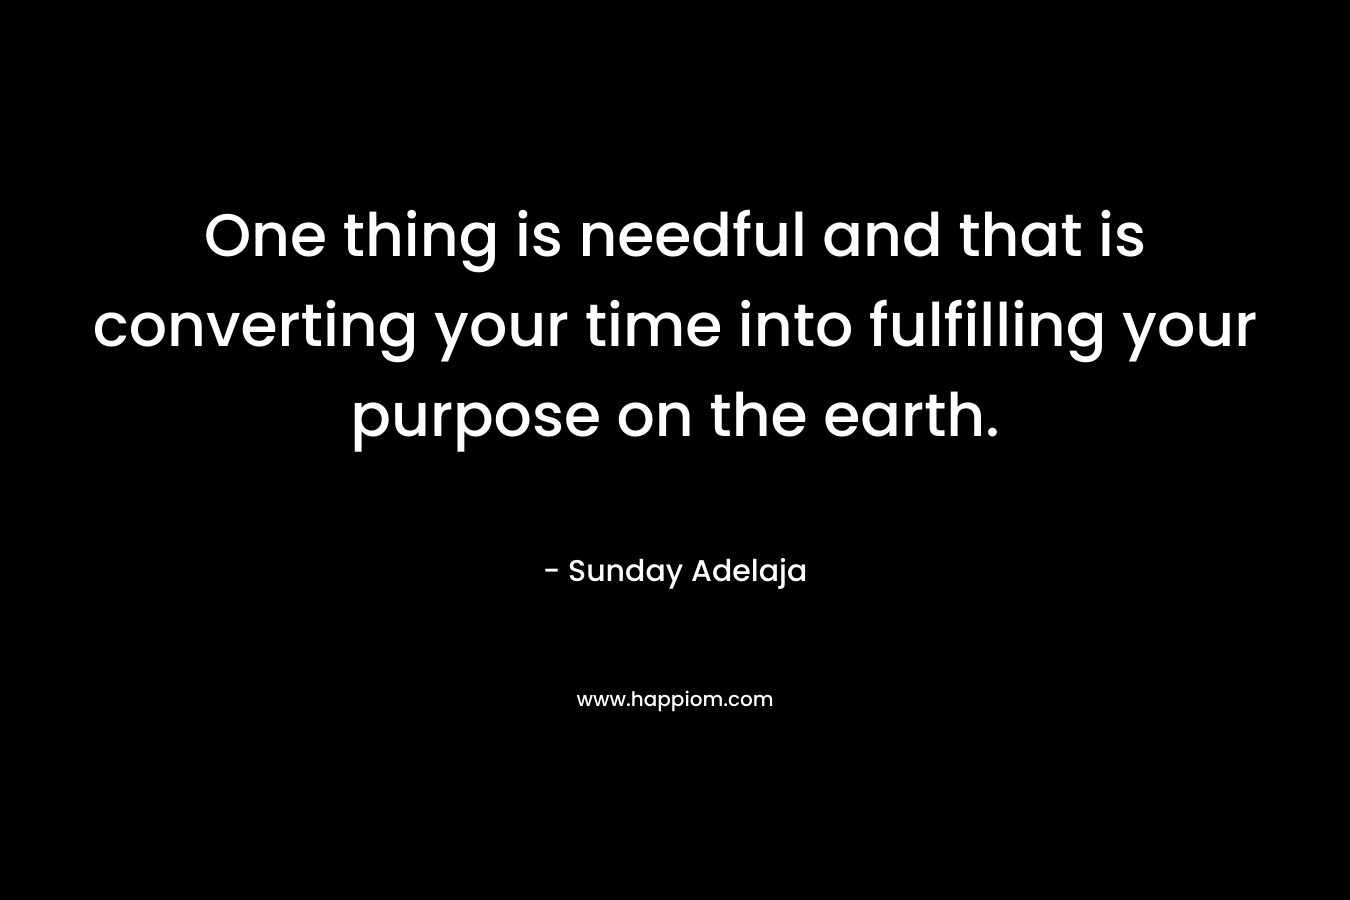 One thing is needful and that is converting your time into fulfilling your purpose on the earth.